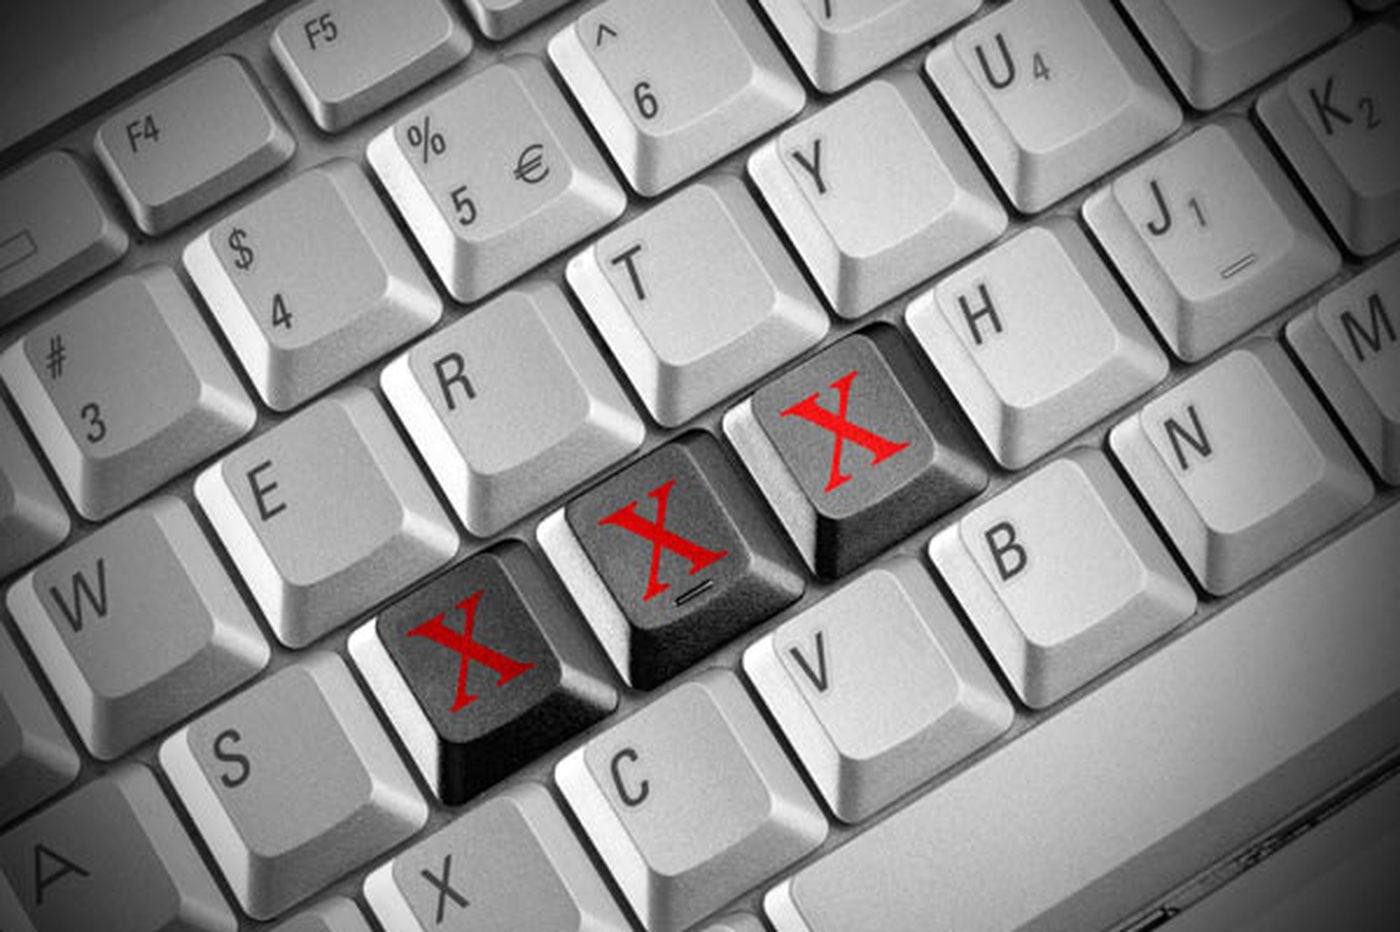 Xxx Computer - XXX-tra. Read all about the sociology of the porn scandal